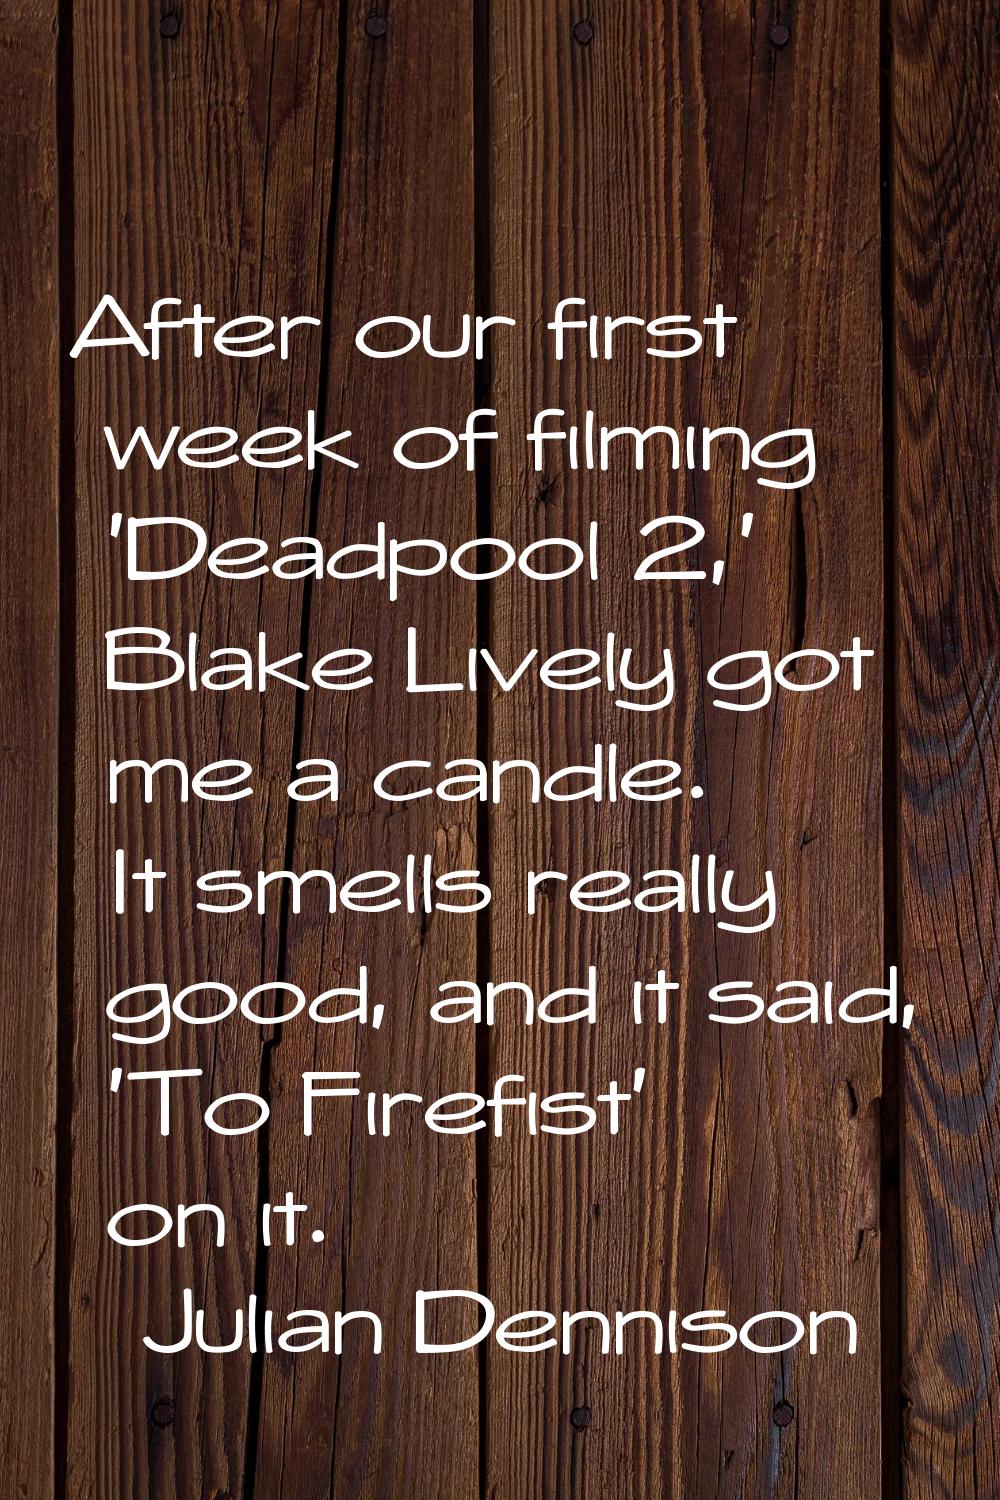 After our first week of filming 'Deadpool 2,' Blake Lively got me a candle. It smells really good, 